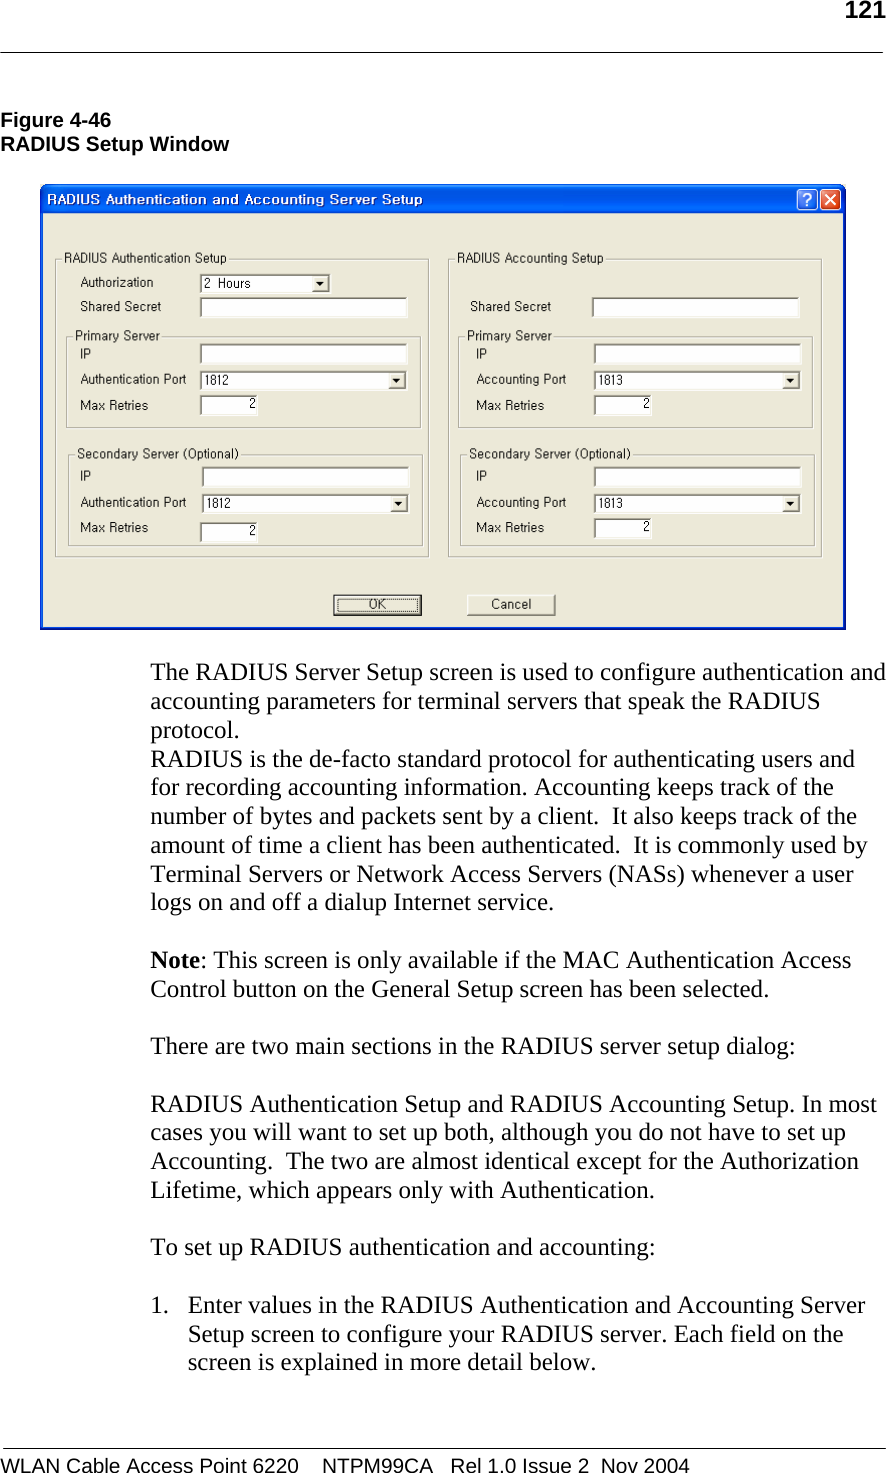   121  WLAN Cable Access Point 6220    NTPM99CA   Rel 1.0 Issue 2  Nov 2004 Figure 4-46 RADIUS Setup Window    The RADIUS Server Setup screen is used to configure authentication and accounting parameters for terminal servers that speak the RADIUS protocol. RADIUS is the de-facto standard protocol for authenticating users and for recording accounting information. Accounting keeps track of the number of bytes and packets sent by a client.  It also keeps track of the amount of time a client has been authenticated.  It is commonly used by Terminal Servers or Network Access Servers (NASs) whenever a user logs on and off a dialup Internet service.   Note: This screen is only available if the MAC Authentication Access Control button on the General Setup screen has been selected.  There are two main sections in the RADIUS server setup dialog:    RADIUS Authentication Setup and RADIUS Accounting Setup. In most cases you will want to set up both, although you do not have to set up Accounting.  The two are almost identical except for the Authorization Lifetime, which appears only with Authentication.   To set up RADIUS authentication and accounting:  1. Enter values in the RADIUS Authentication and Accounting Server Setup screen to configure your RADIUS server. Each field on the screen is explained in more detail below.  